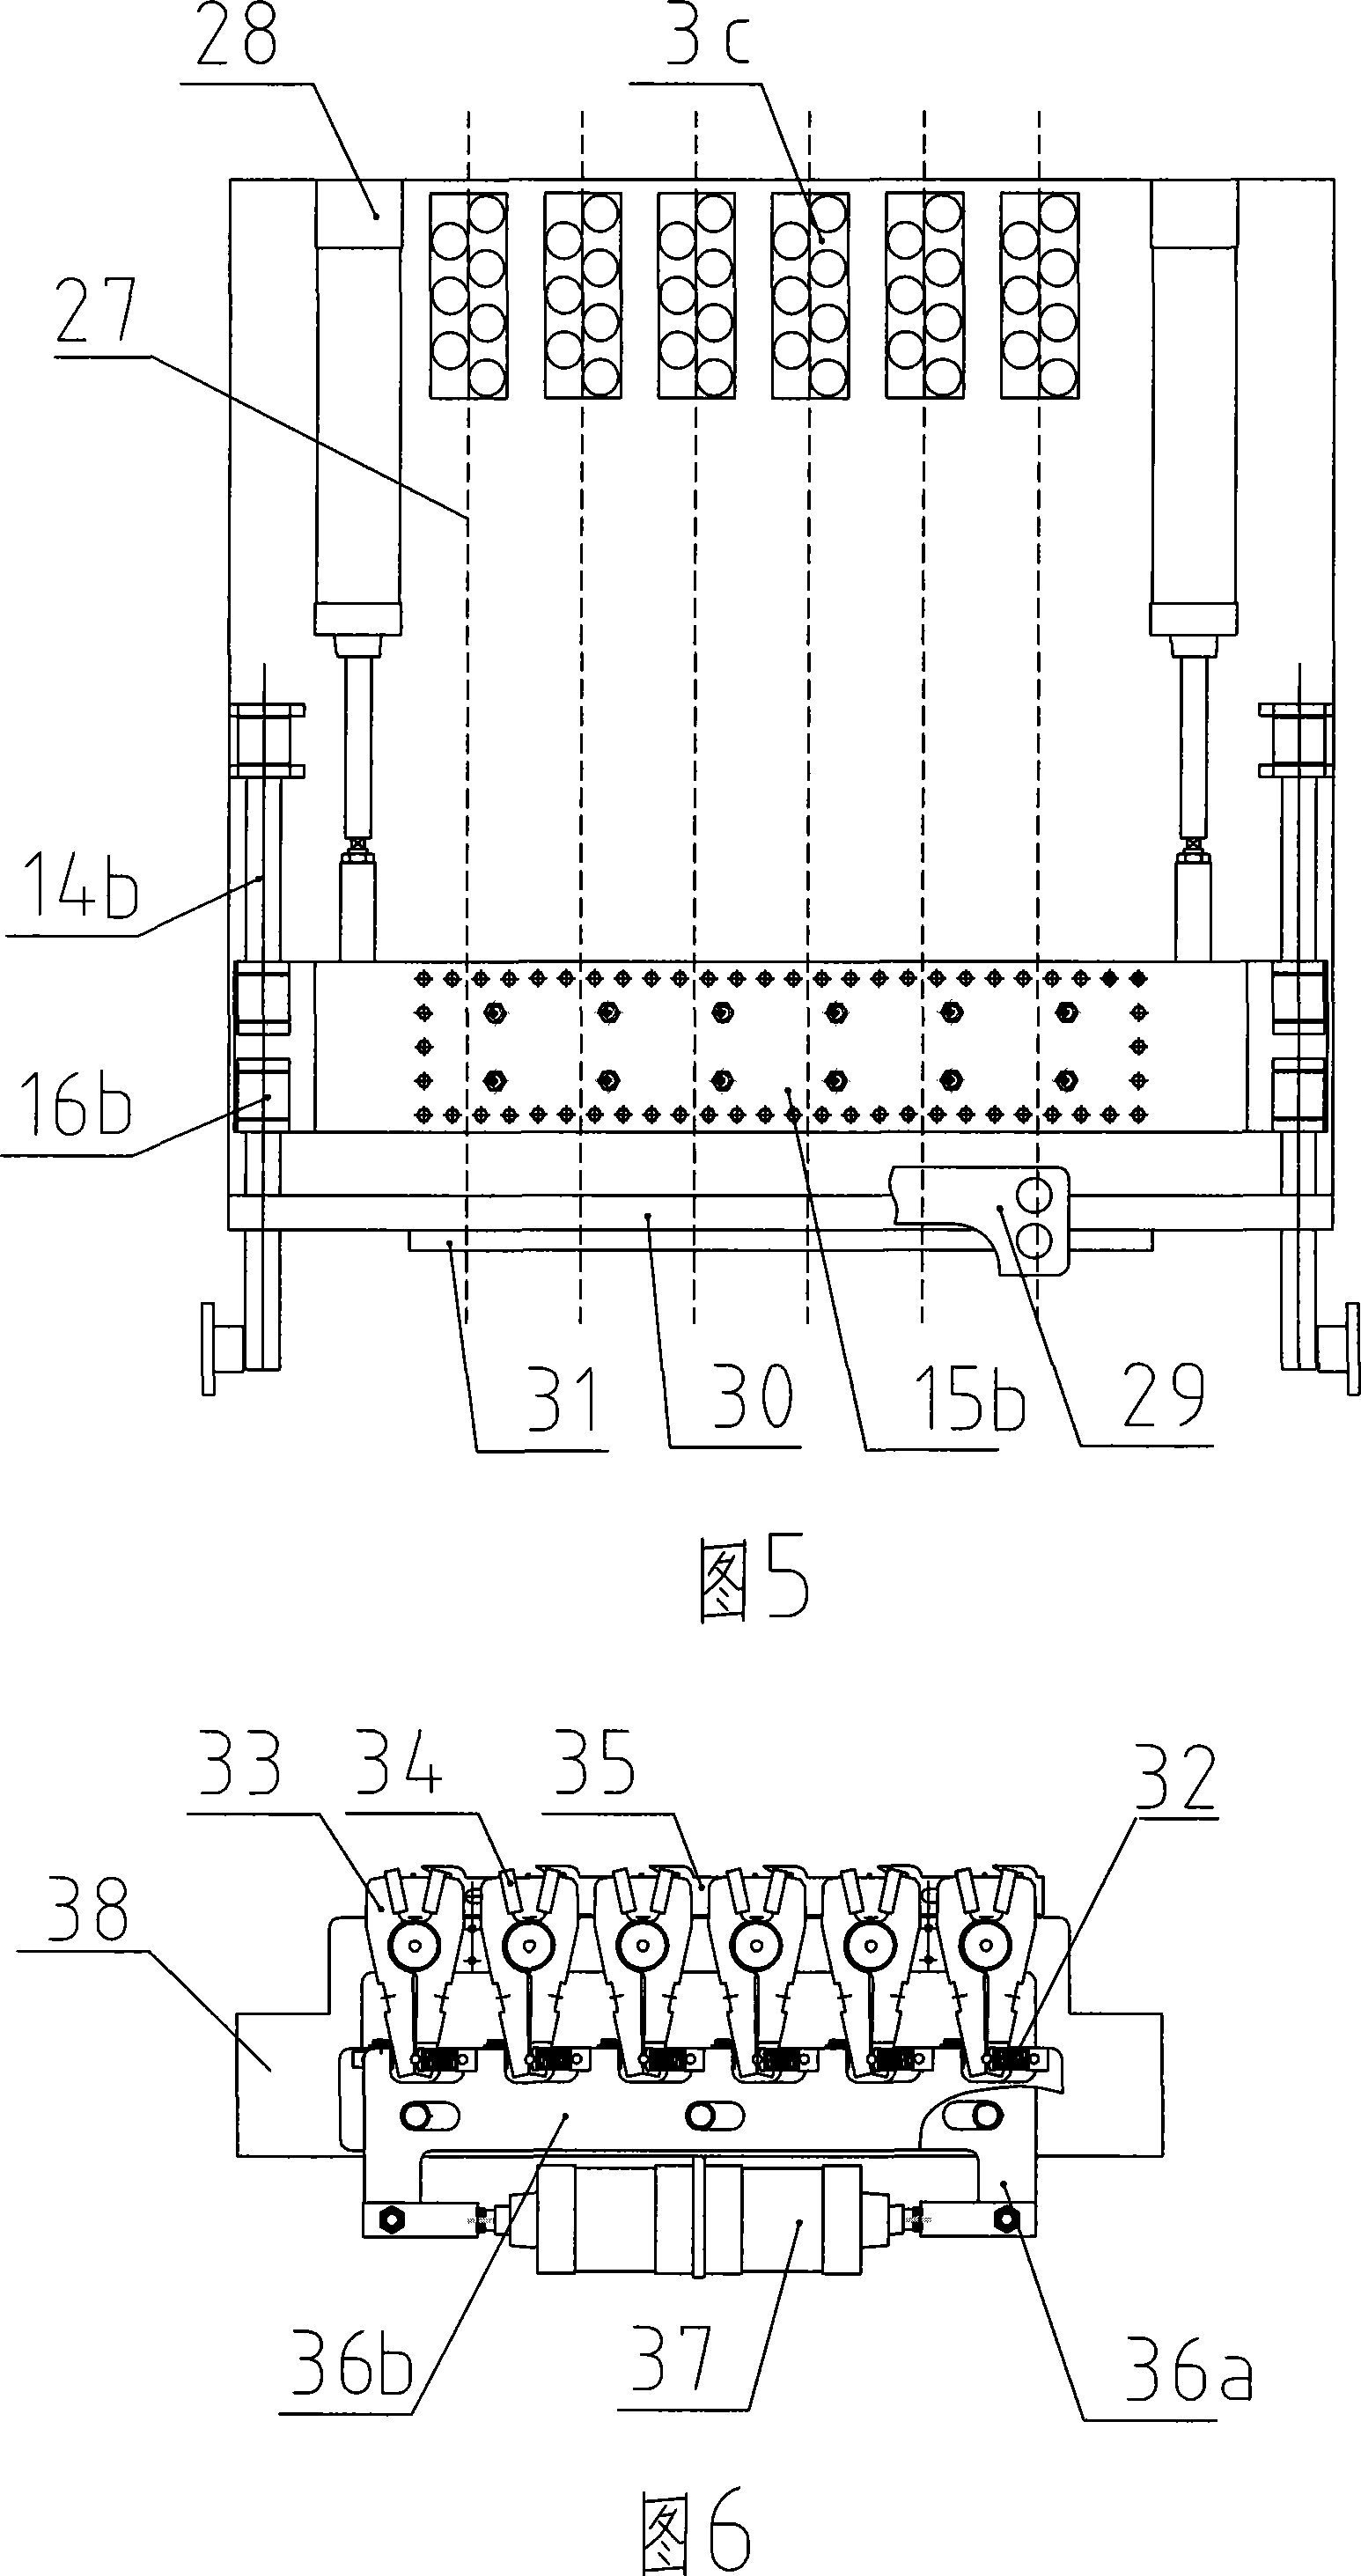 Integrated steel wire forming table shaping apparatus